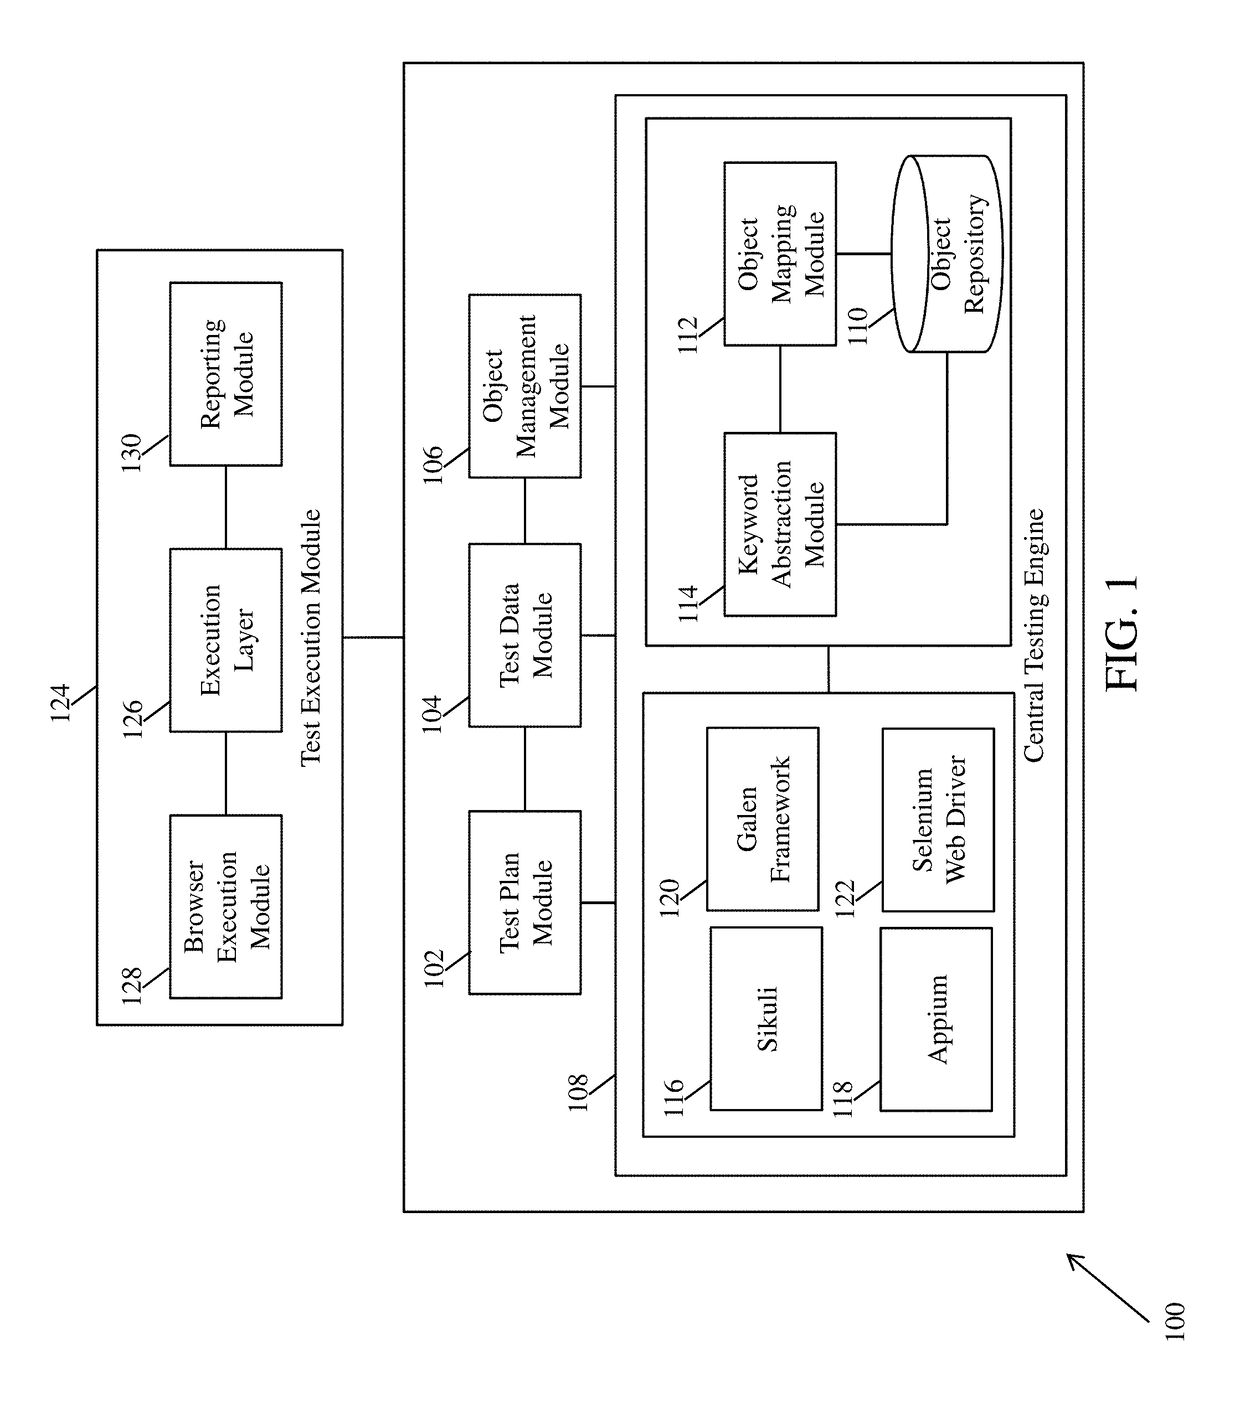 System and method for automating testing of software applications